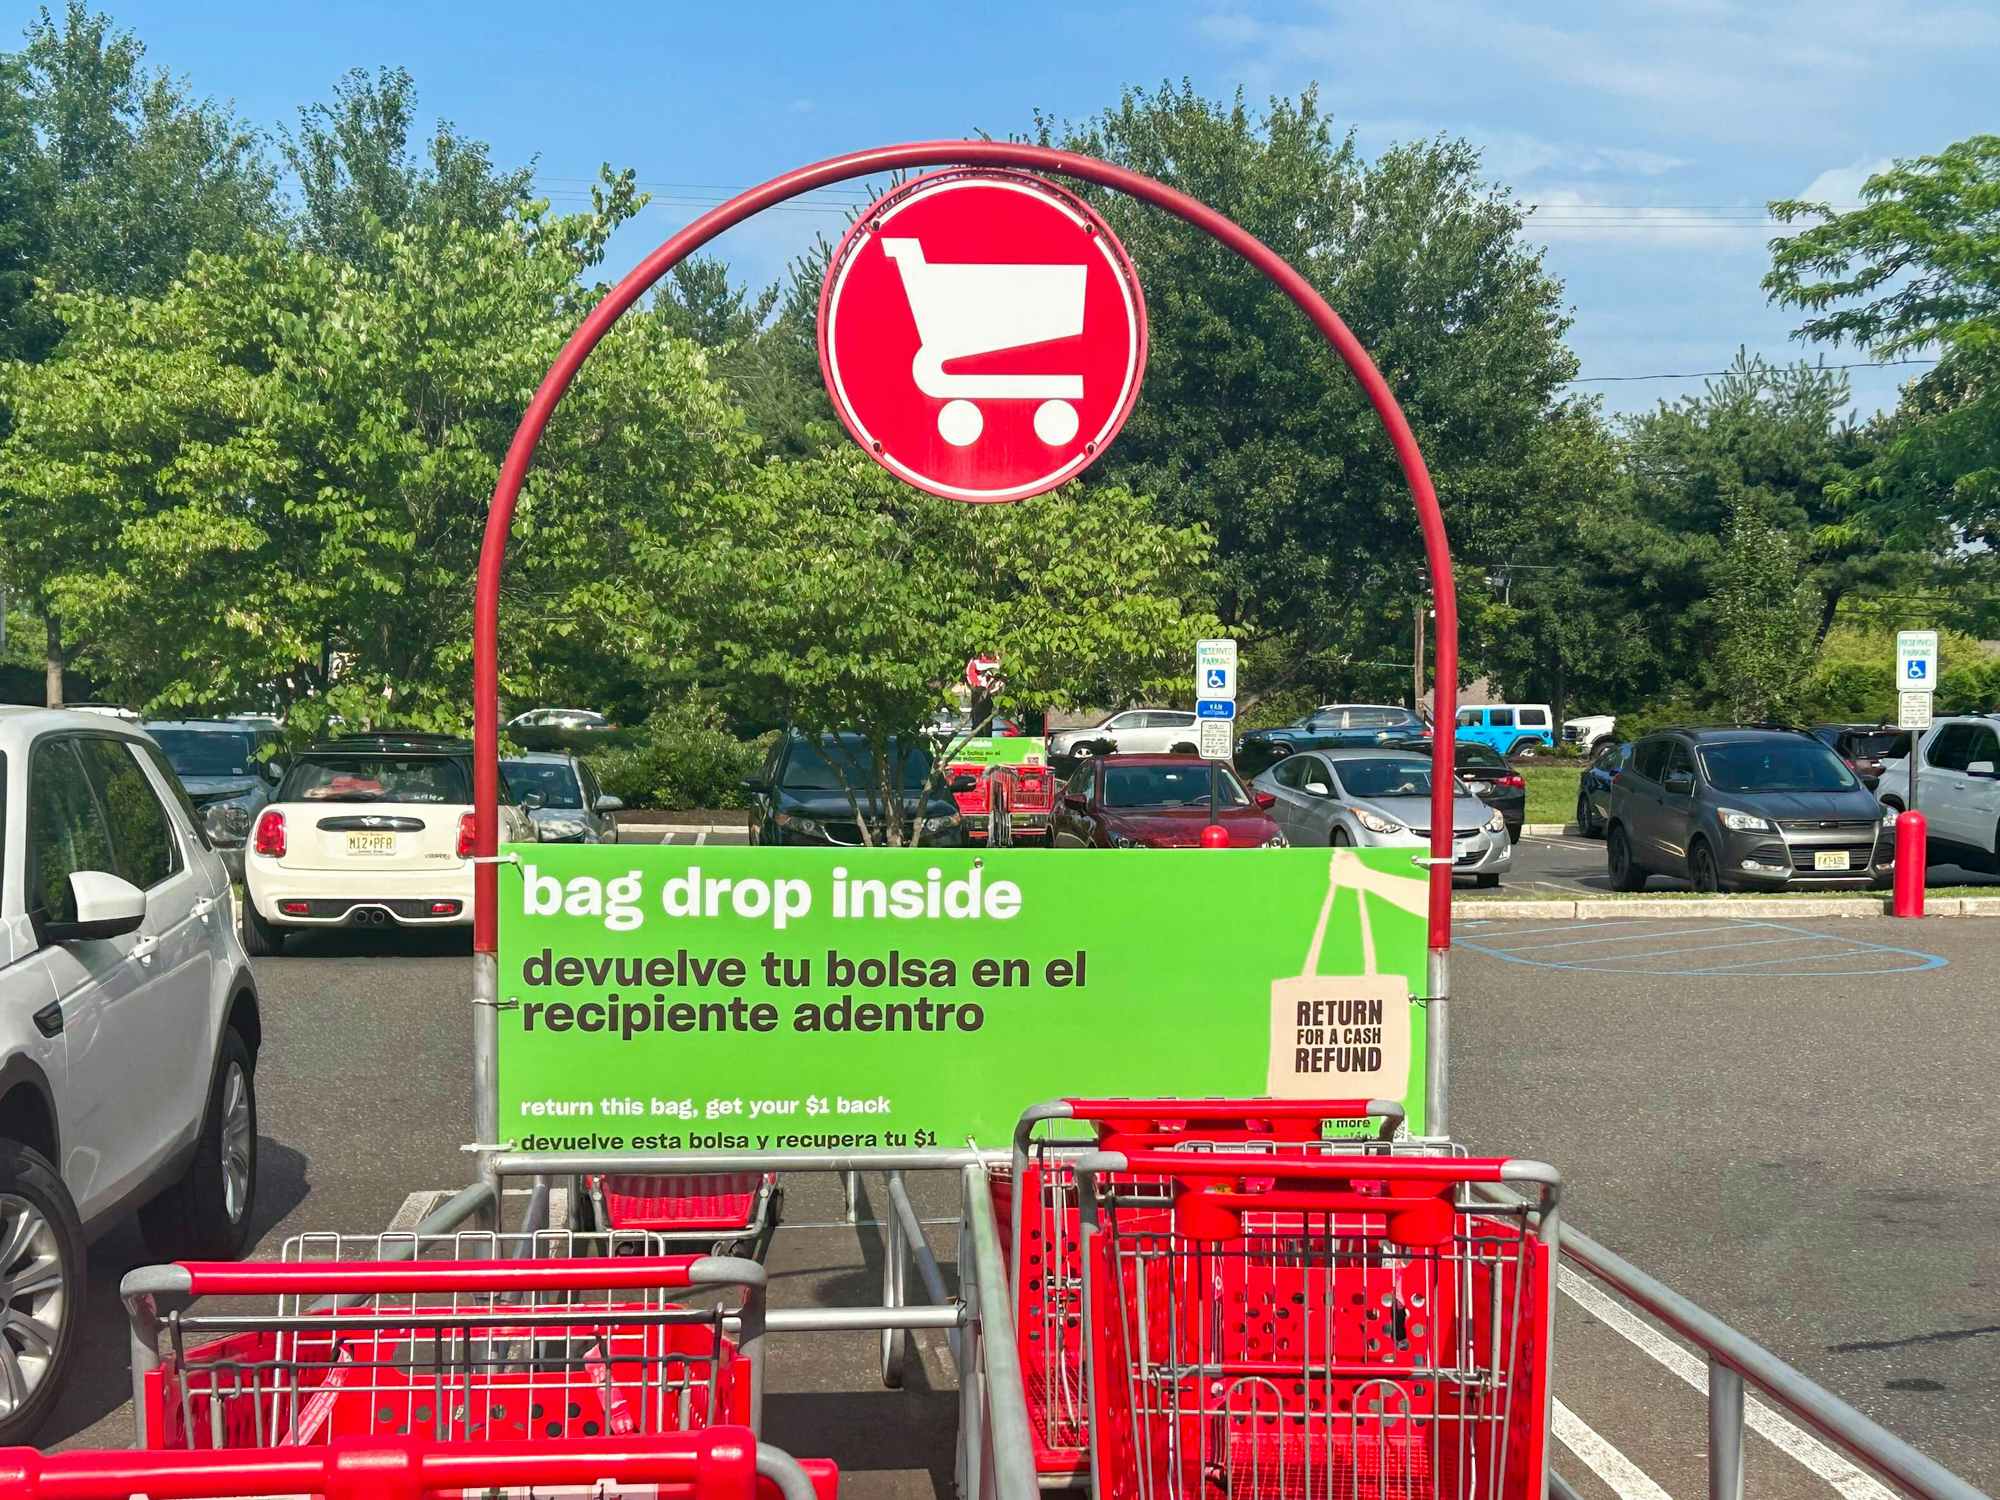 A sign for the returnable bag Bag Drop in Target